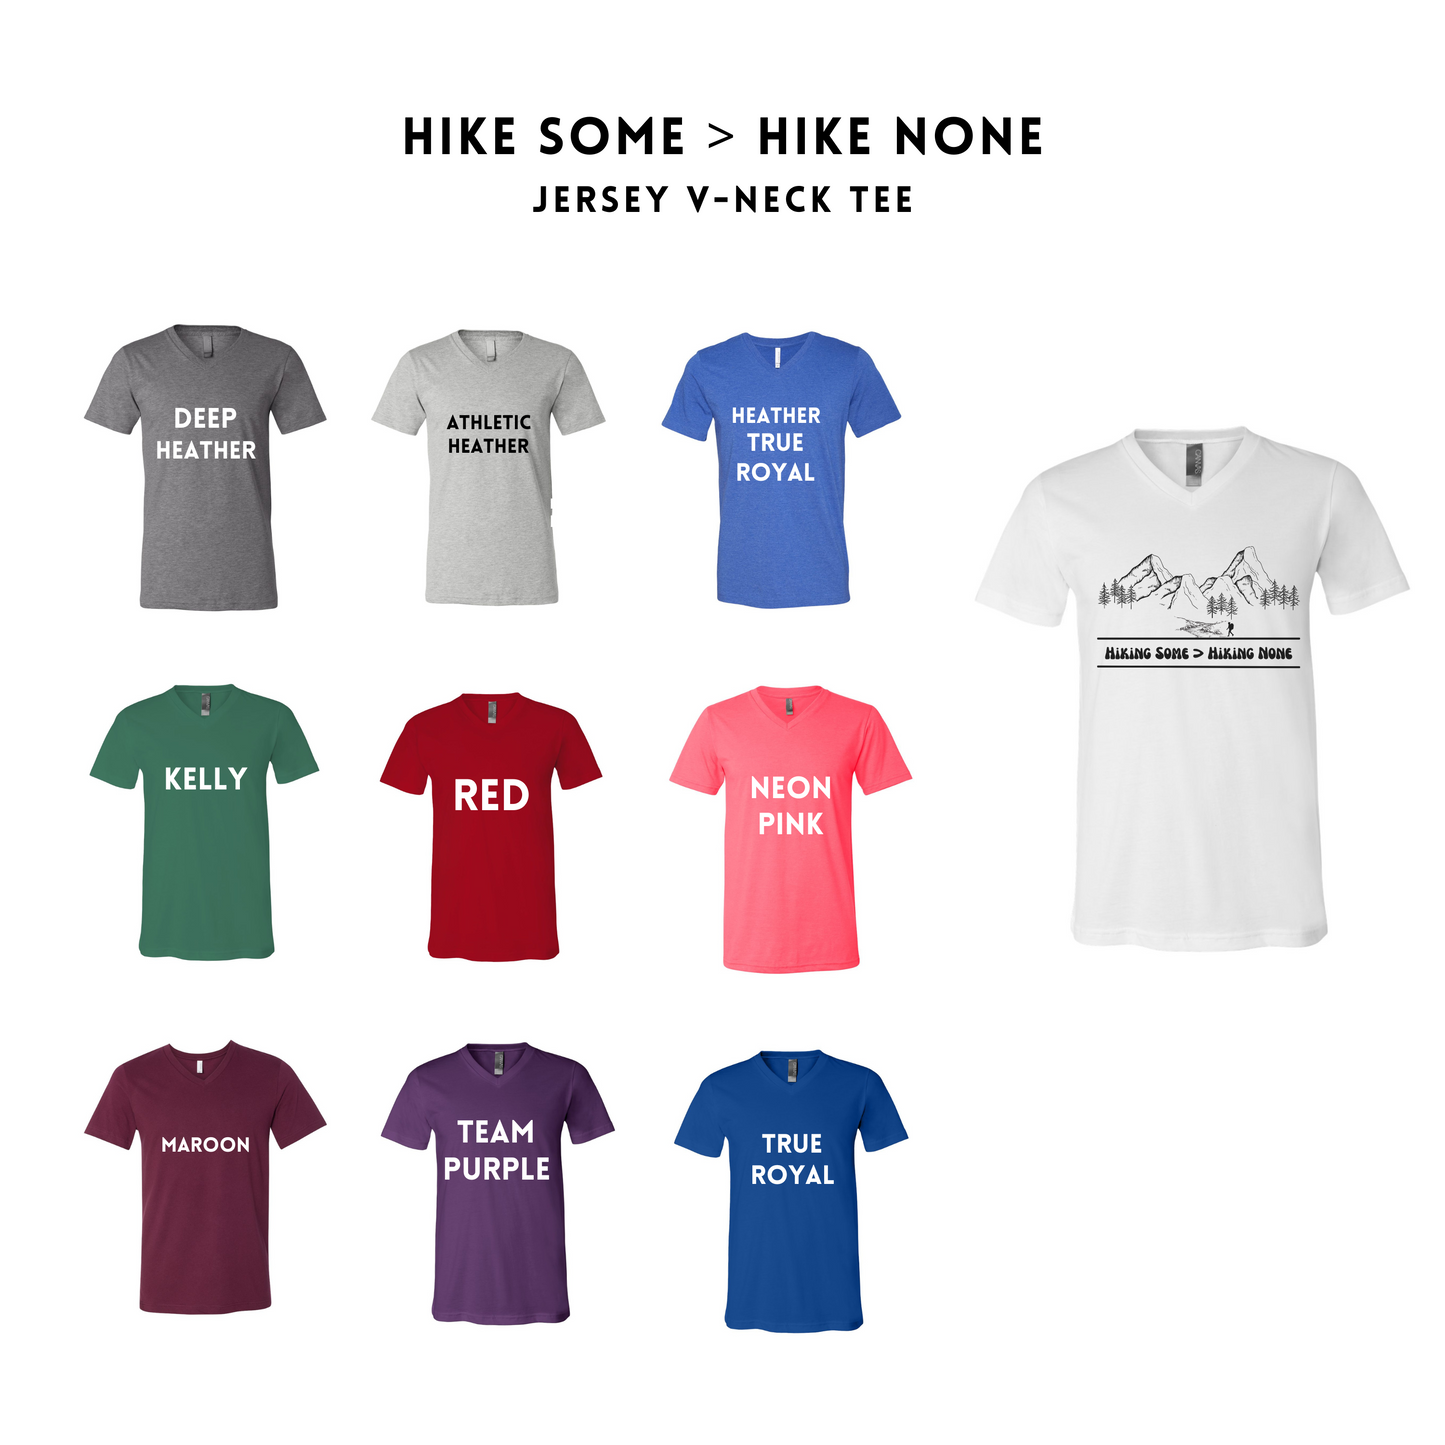 Hiking some is better than hiking none shirt, shirt for hikers, shirt for hike lovers, mountain t-shirt